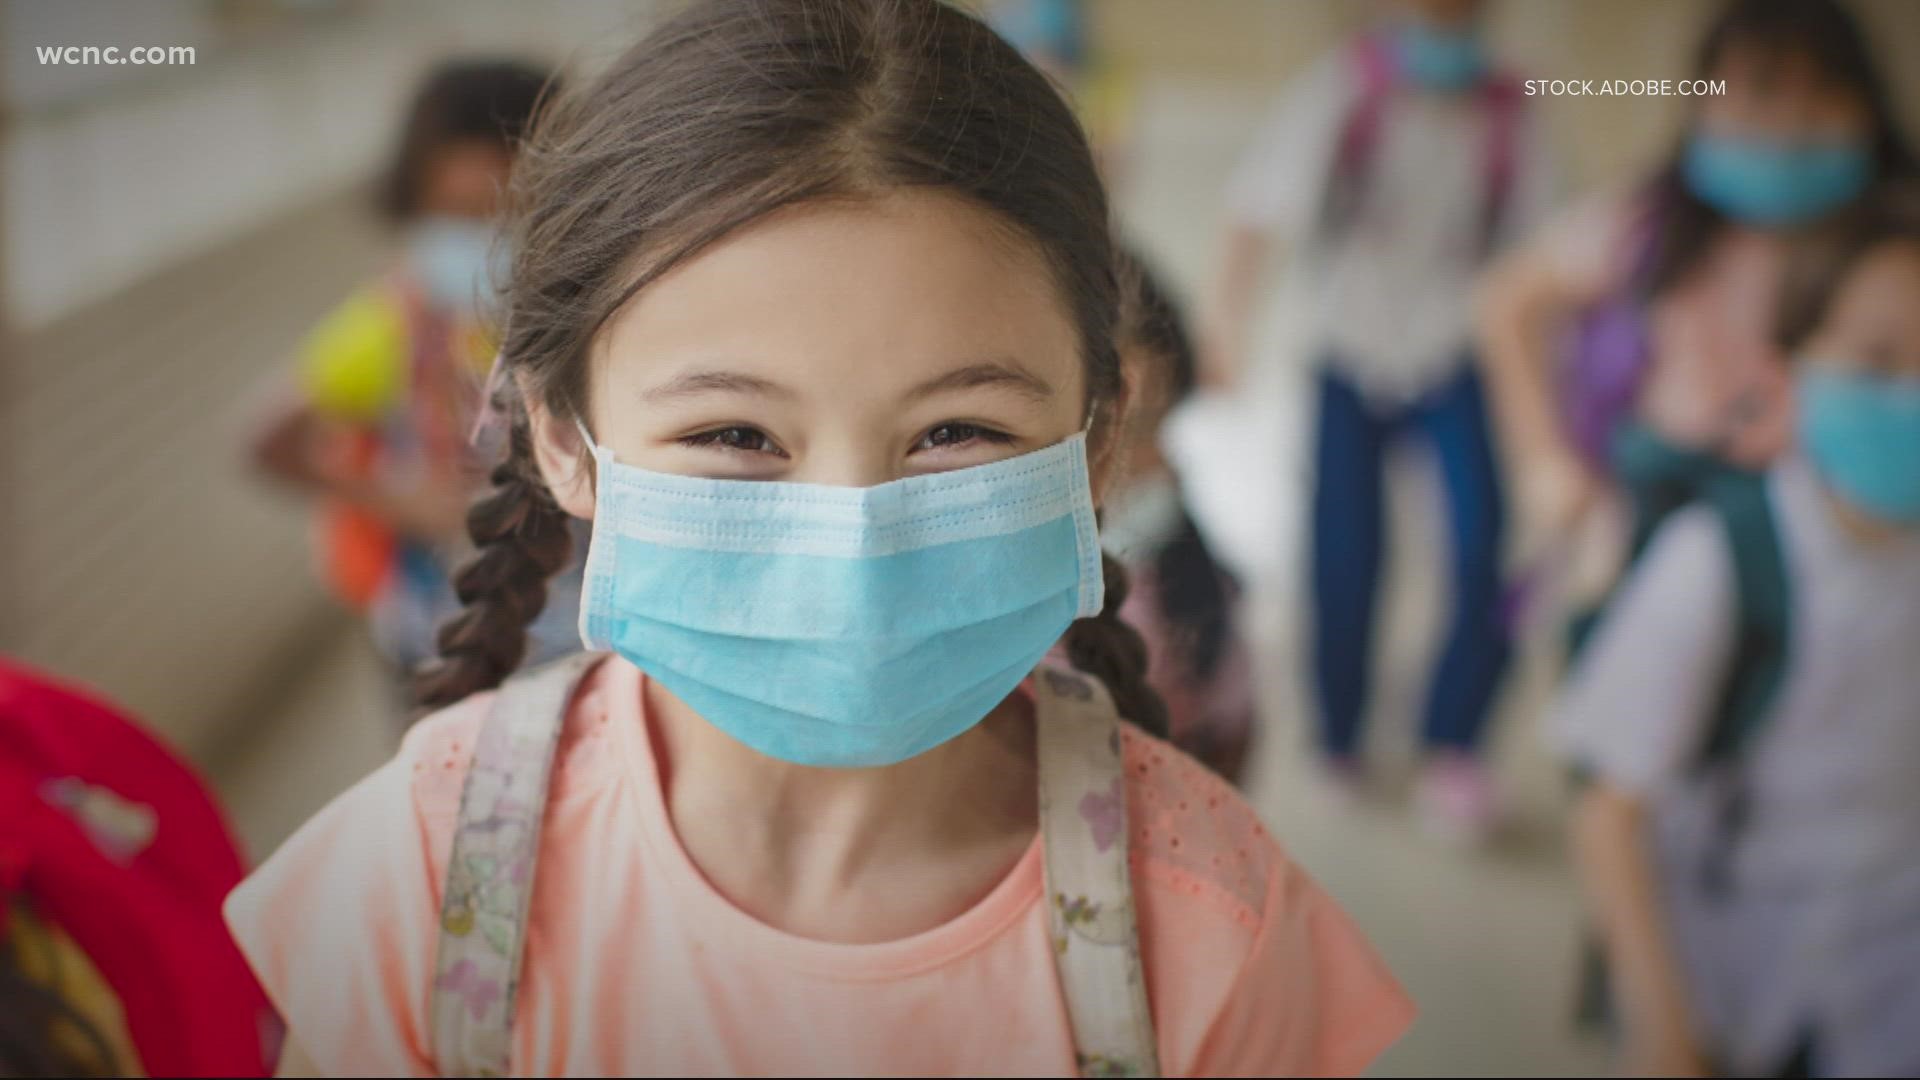 Doctors we spoke with told us masks work when it comes to preventing children from COVID-19.